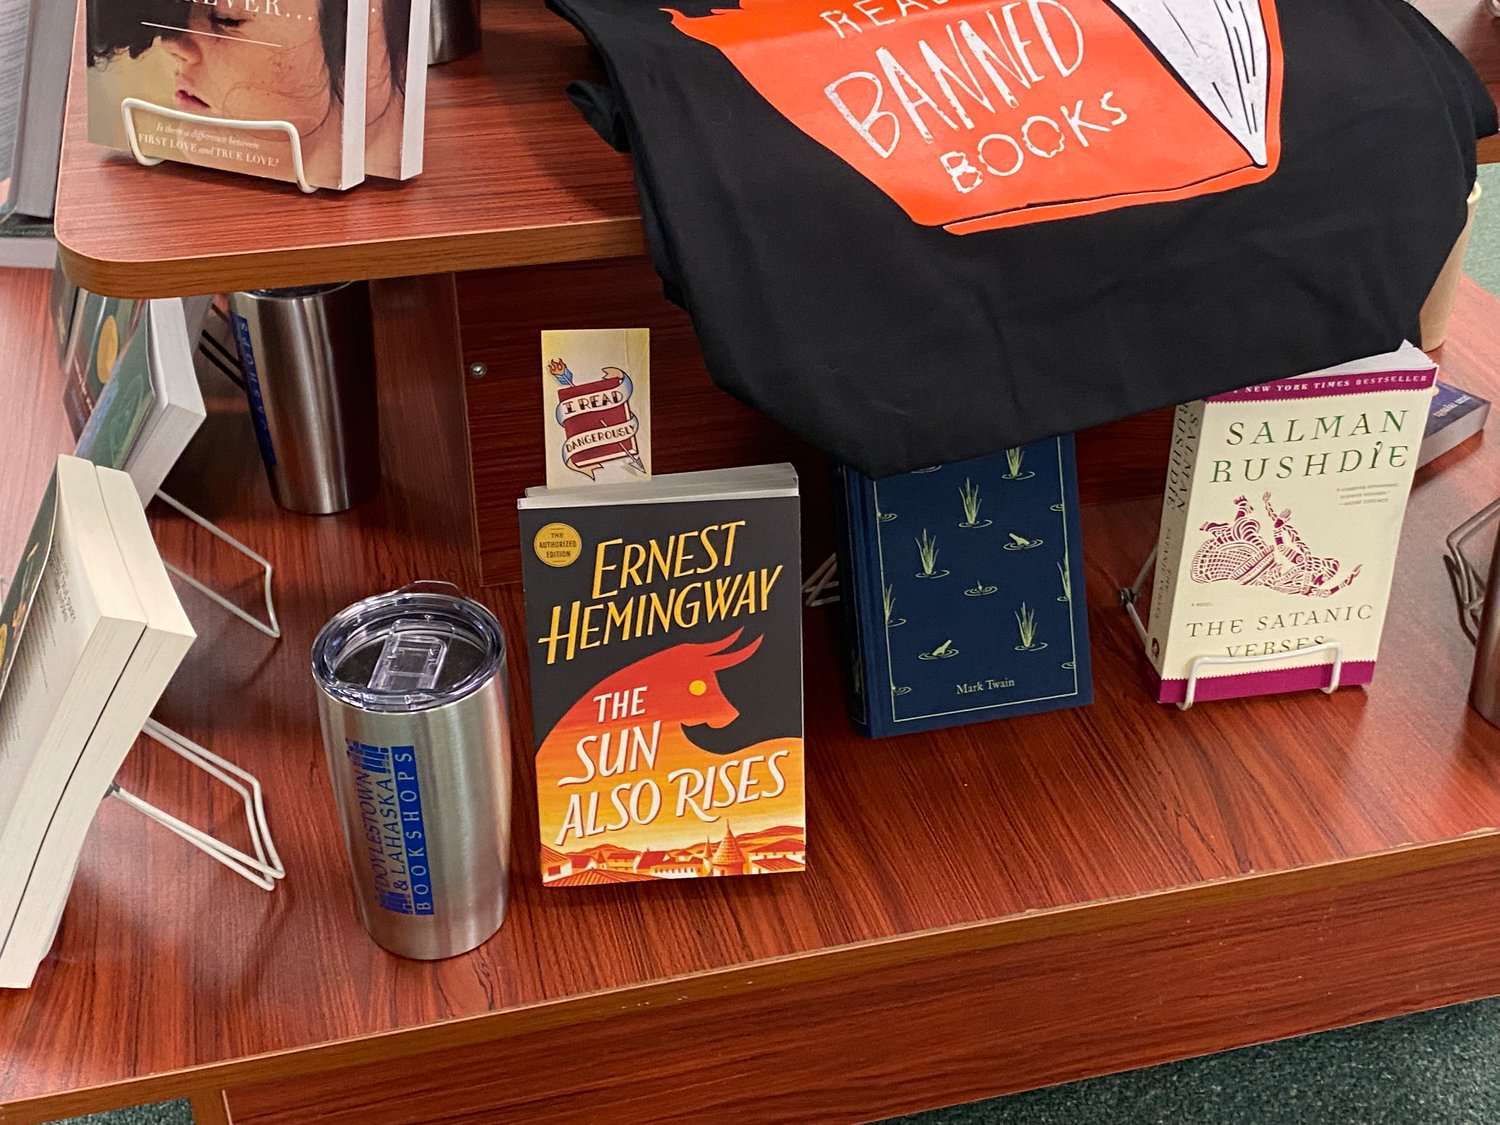 A wide variety of books targeted at adults, including Ernest Hemingway’s The Sun Also Rises, are featured in a display at the Doylestown Bookshop.